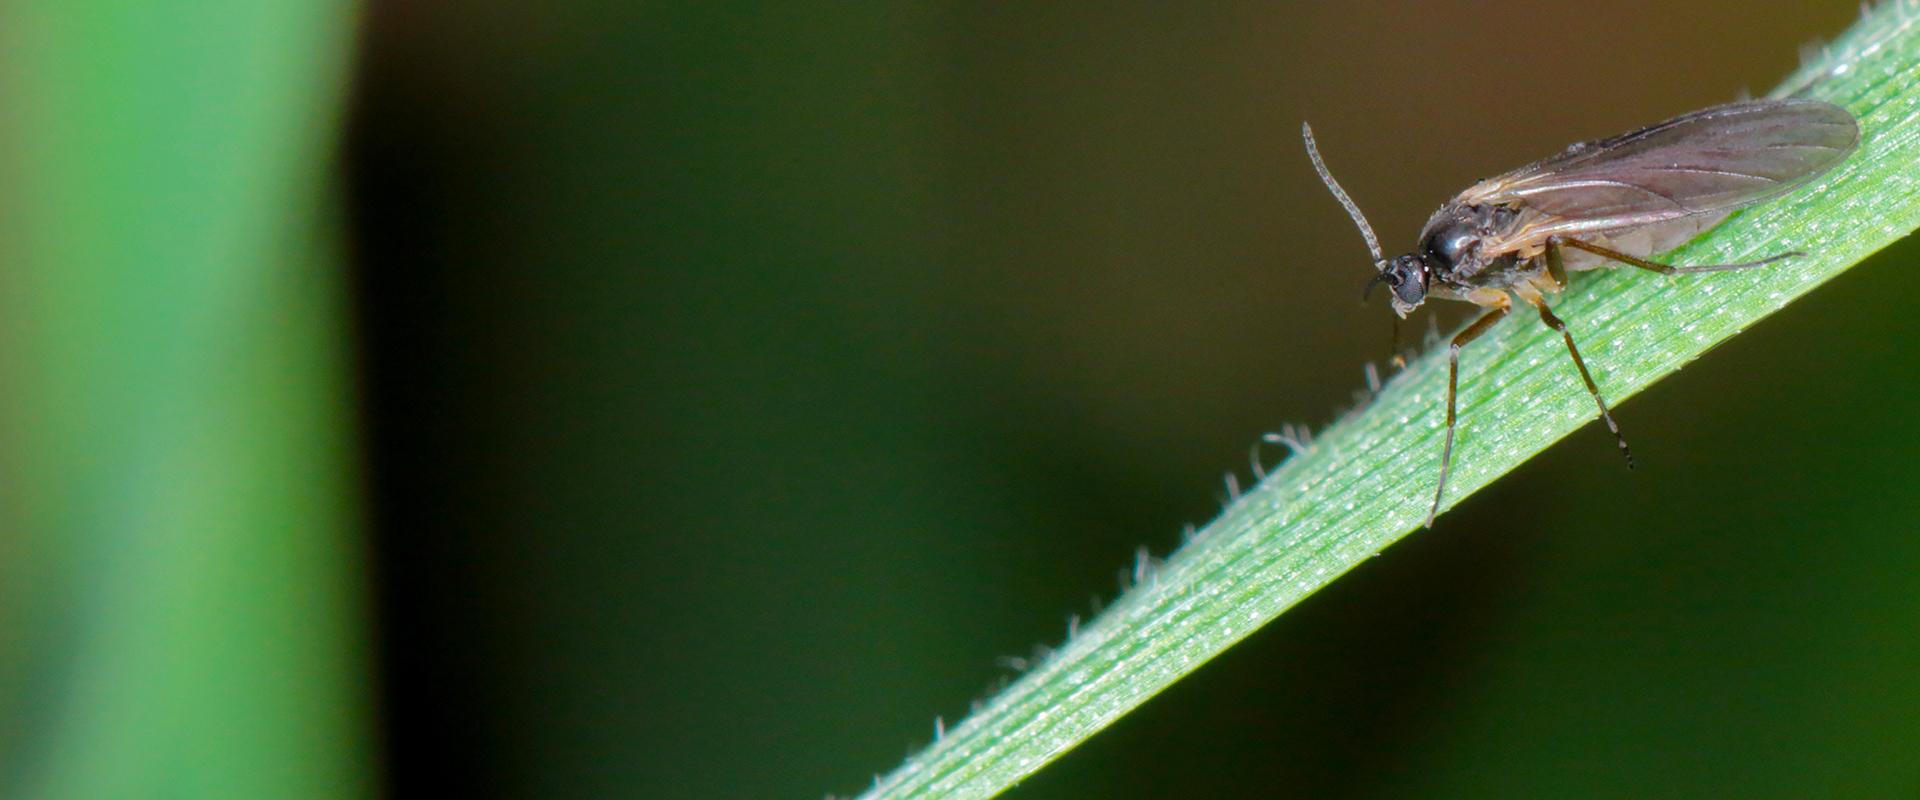 fungus gnat on a blade of grass